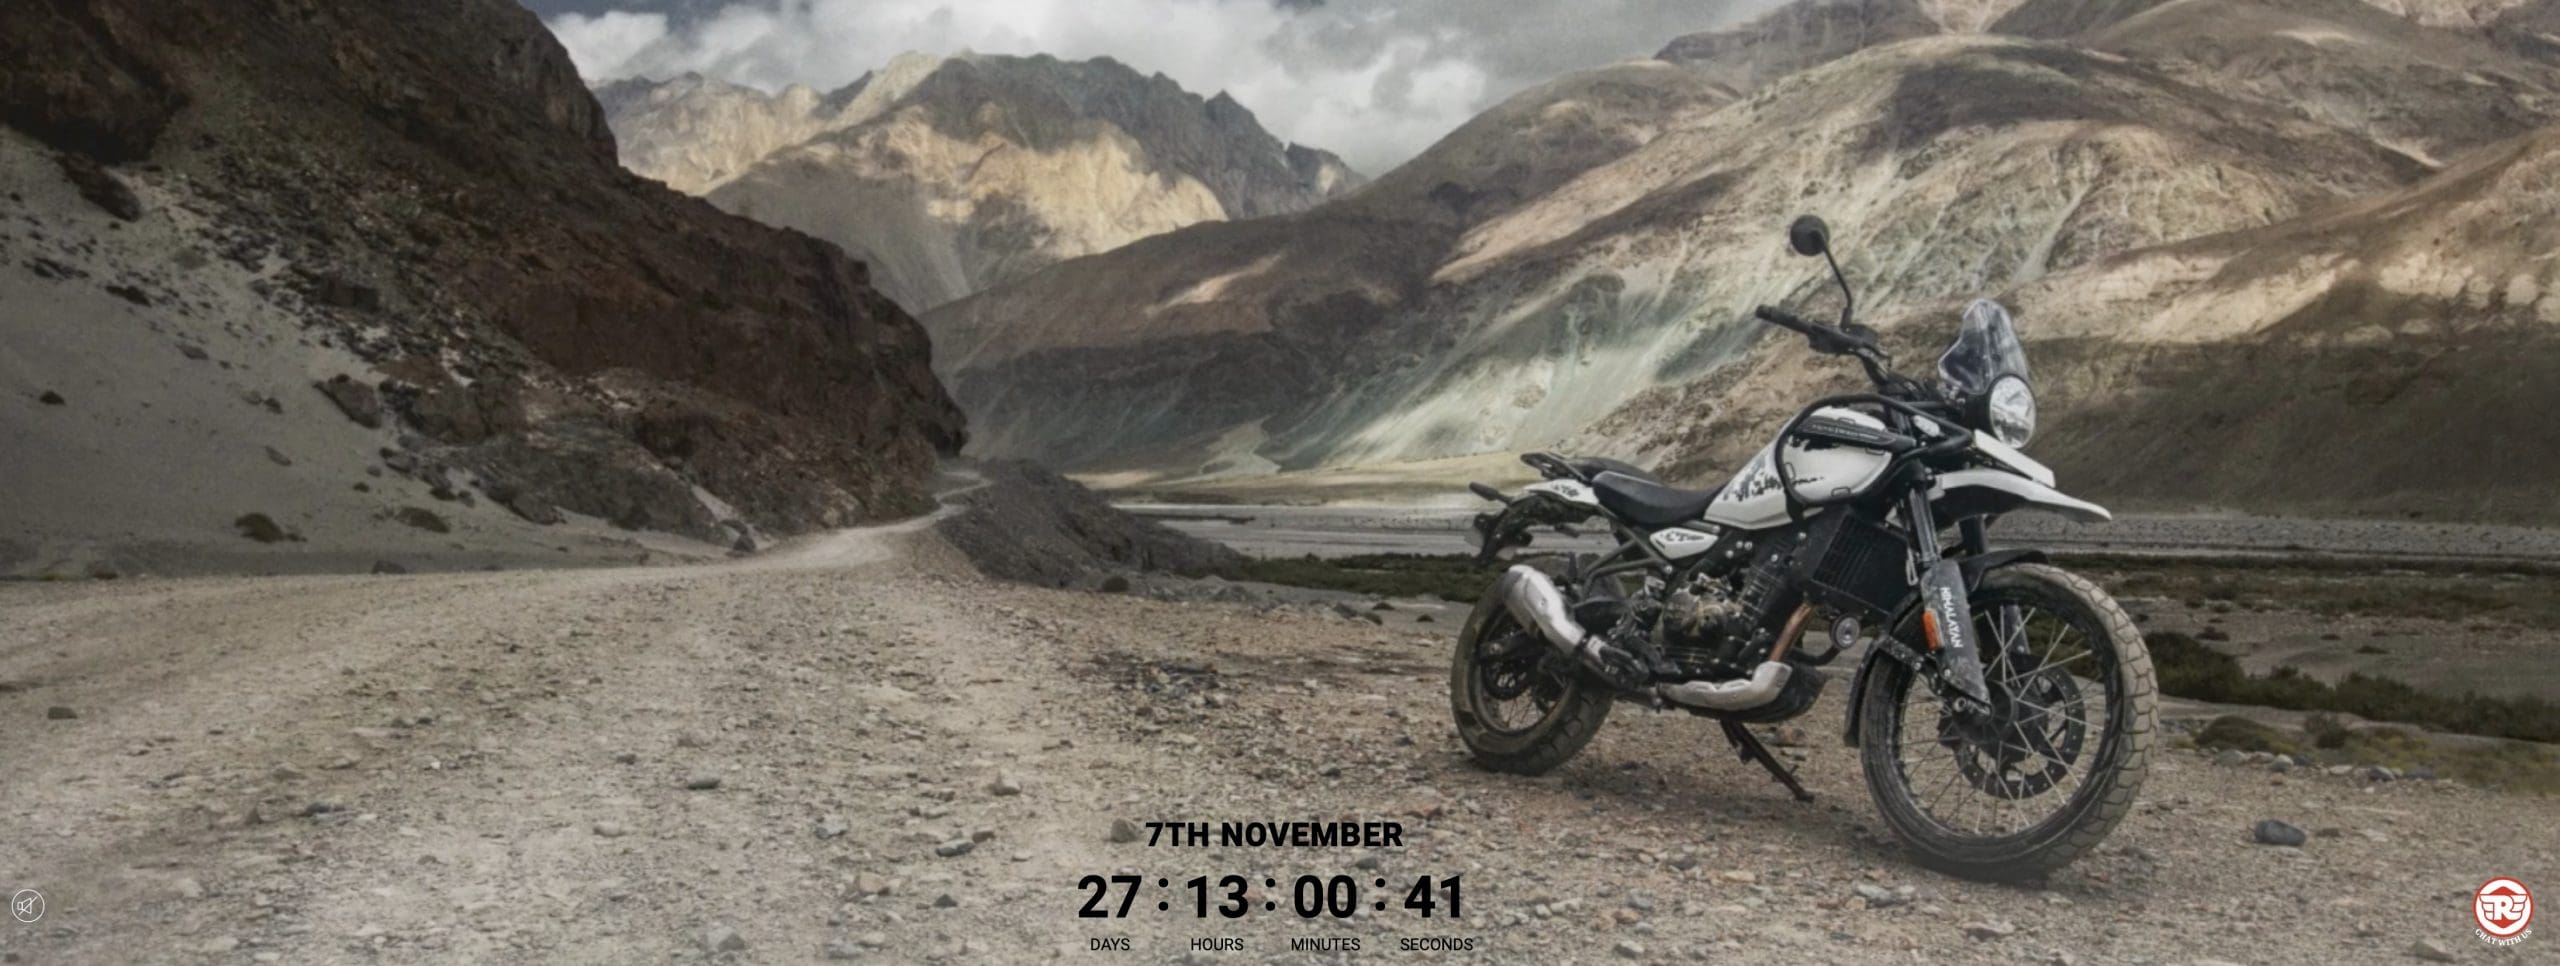 A view of Royal Enfield's soon-to-debut Himalayan 452. Media sourced from Royal Enfield's social media page.